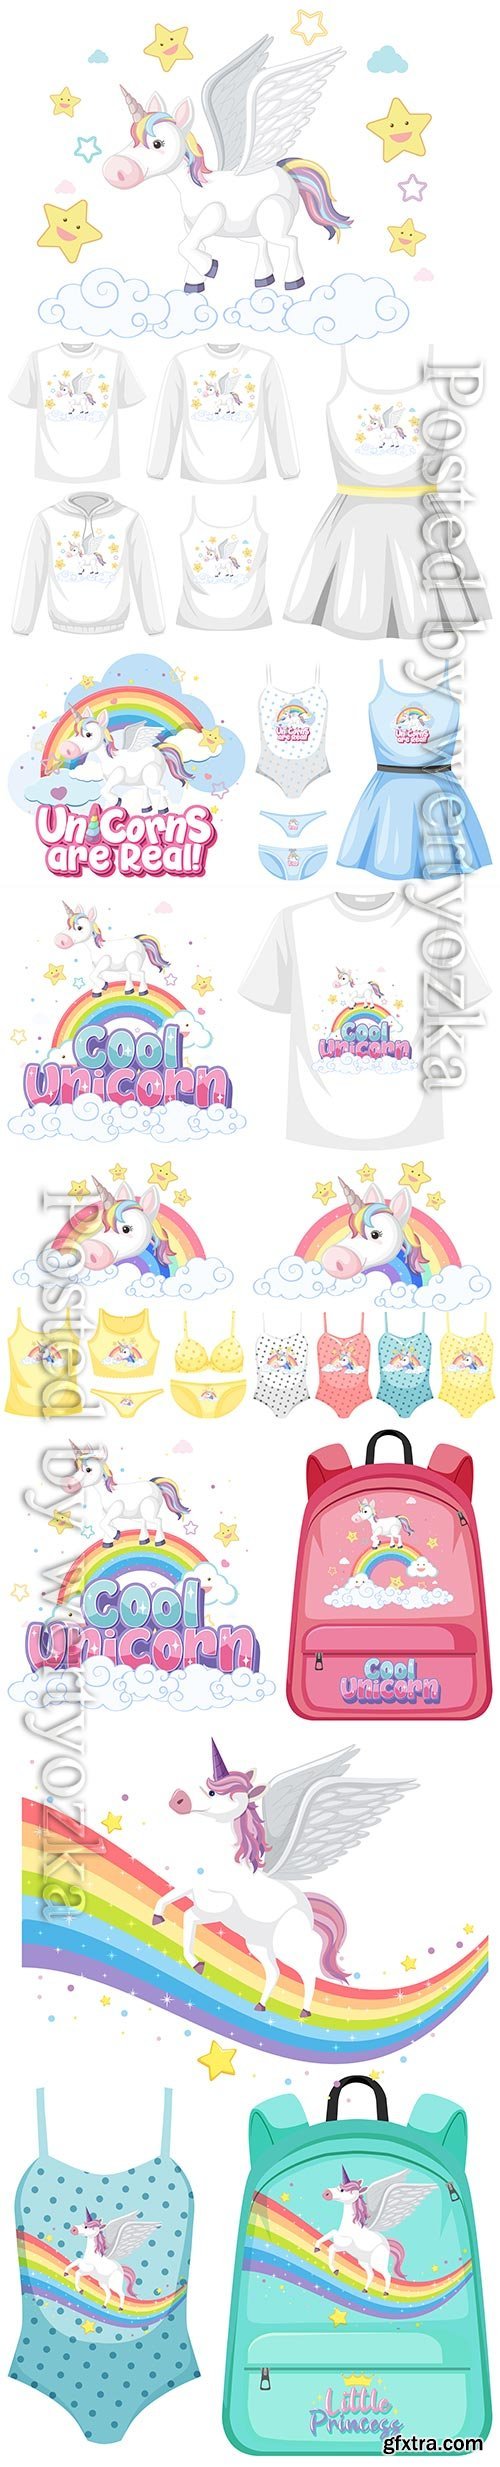 Set of girl outfits, cute unicorn premium vector